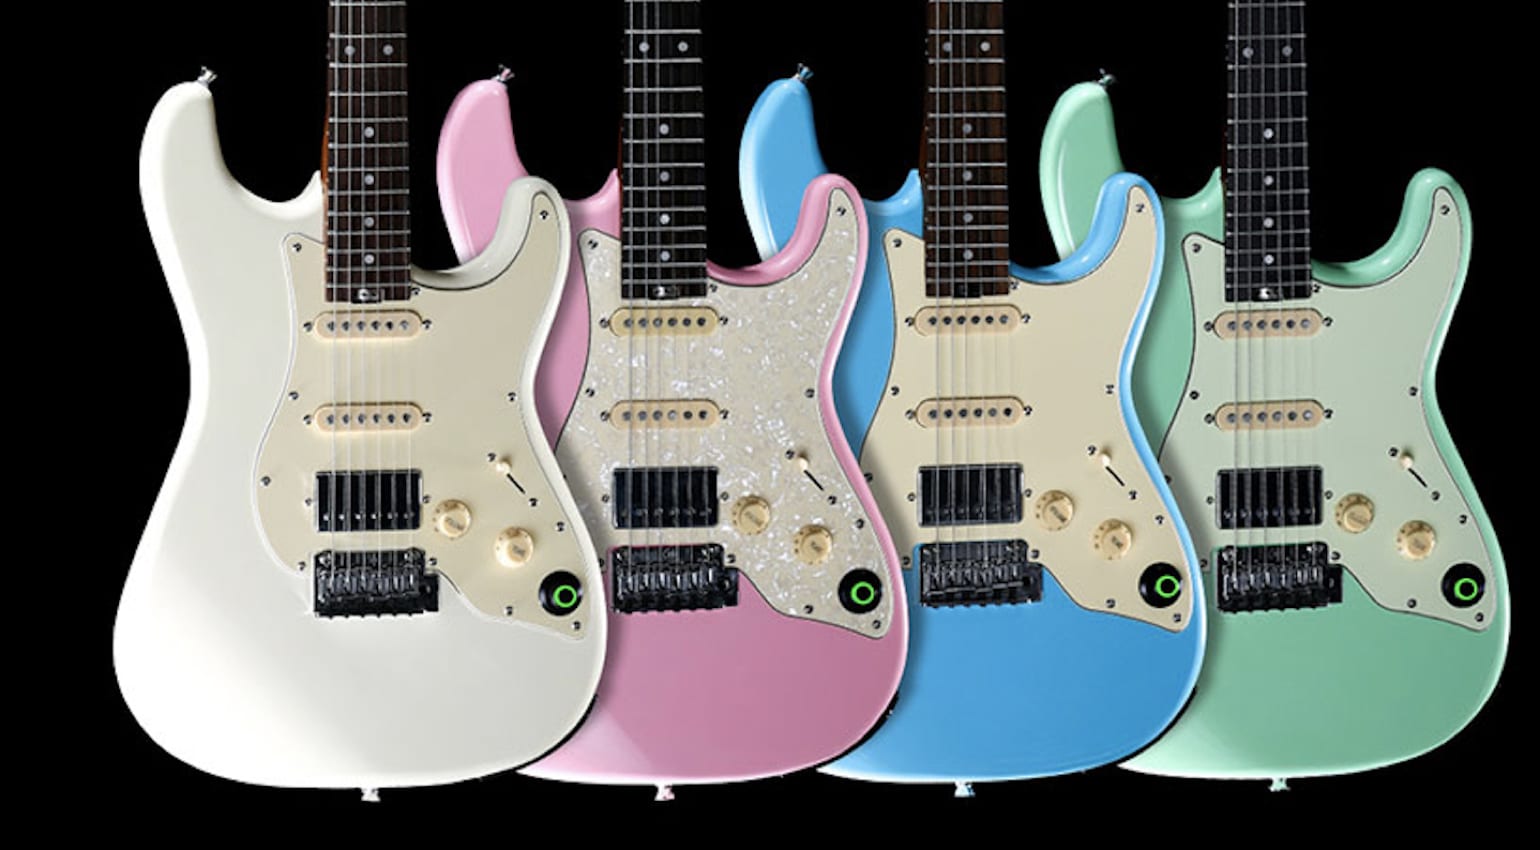 Mooer announces pricing on GTRS Intelligent Guitars, adds new 